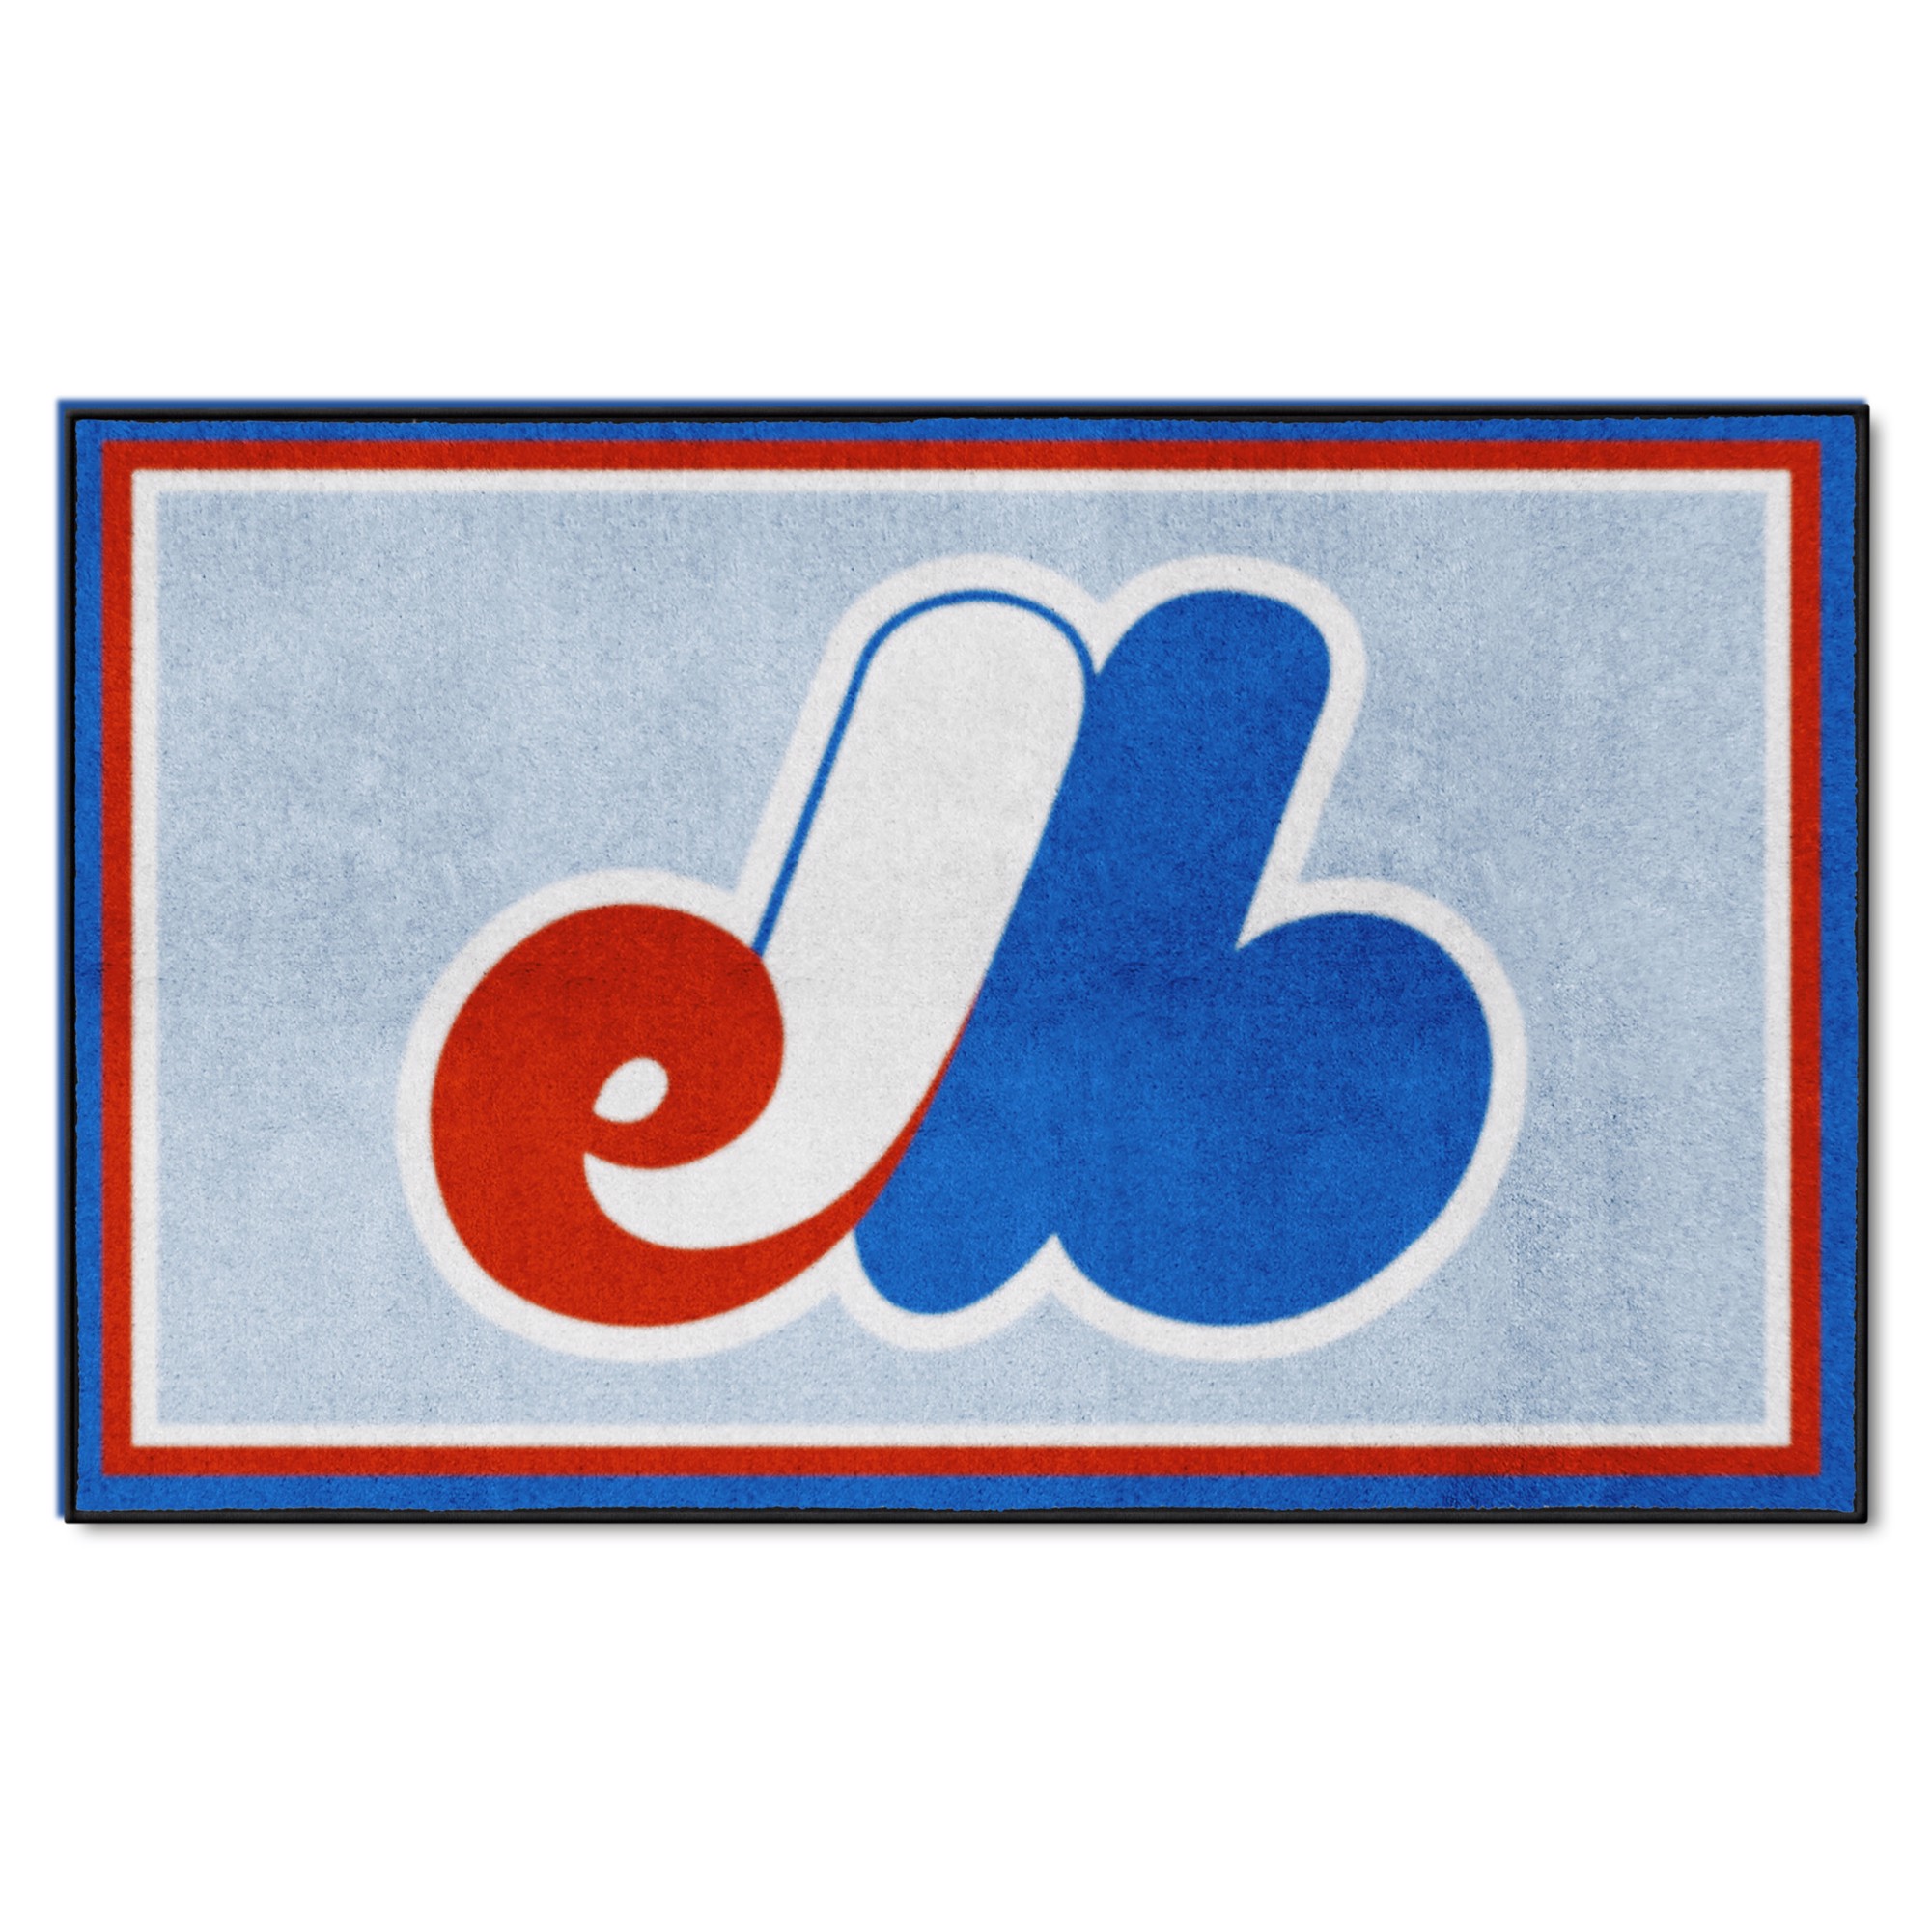 Montreal Expos Primary Patch – The Emblem Source